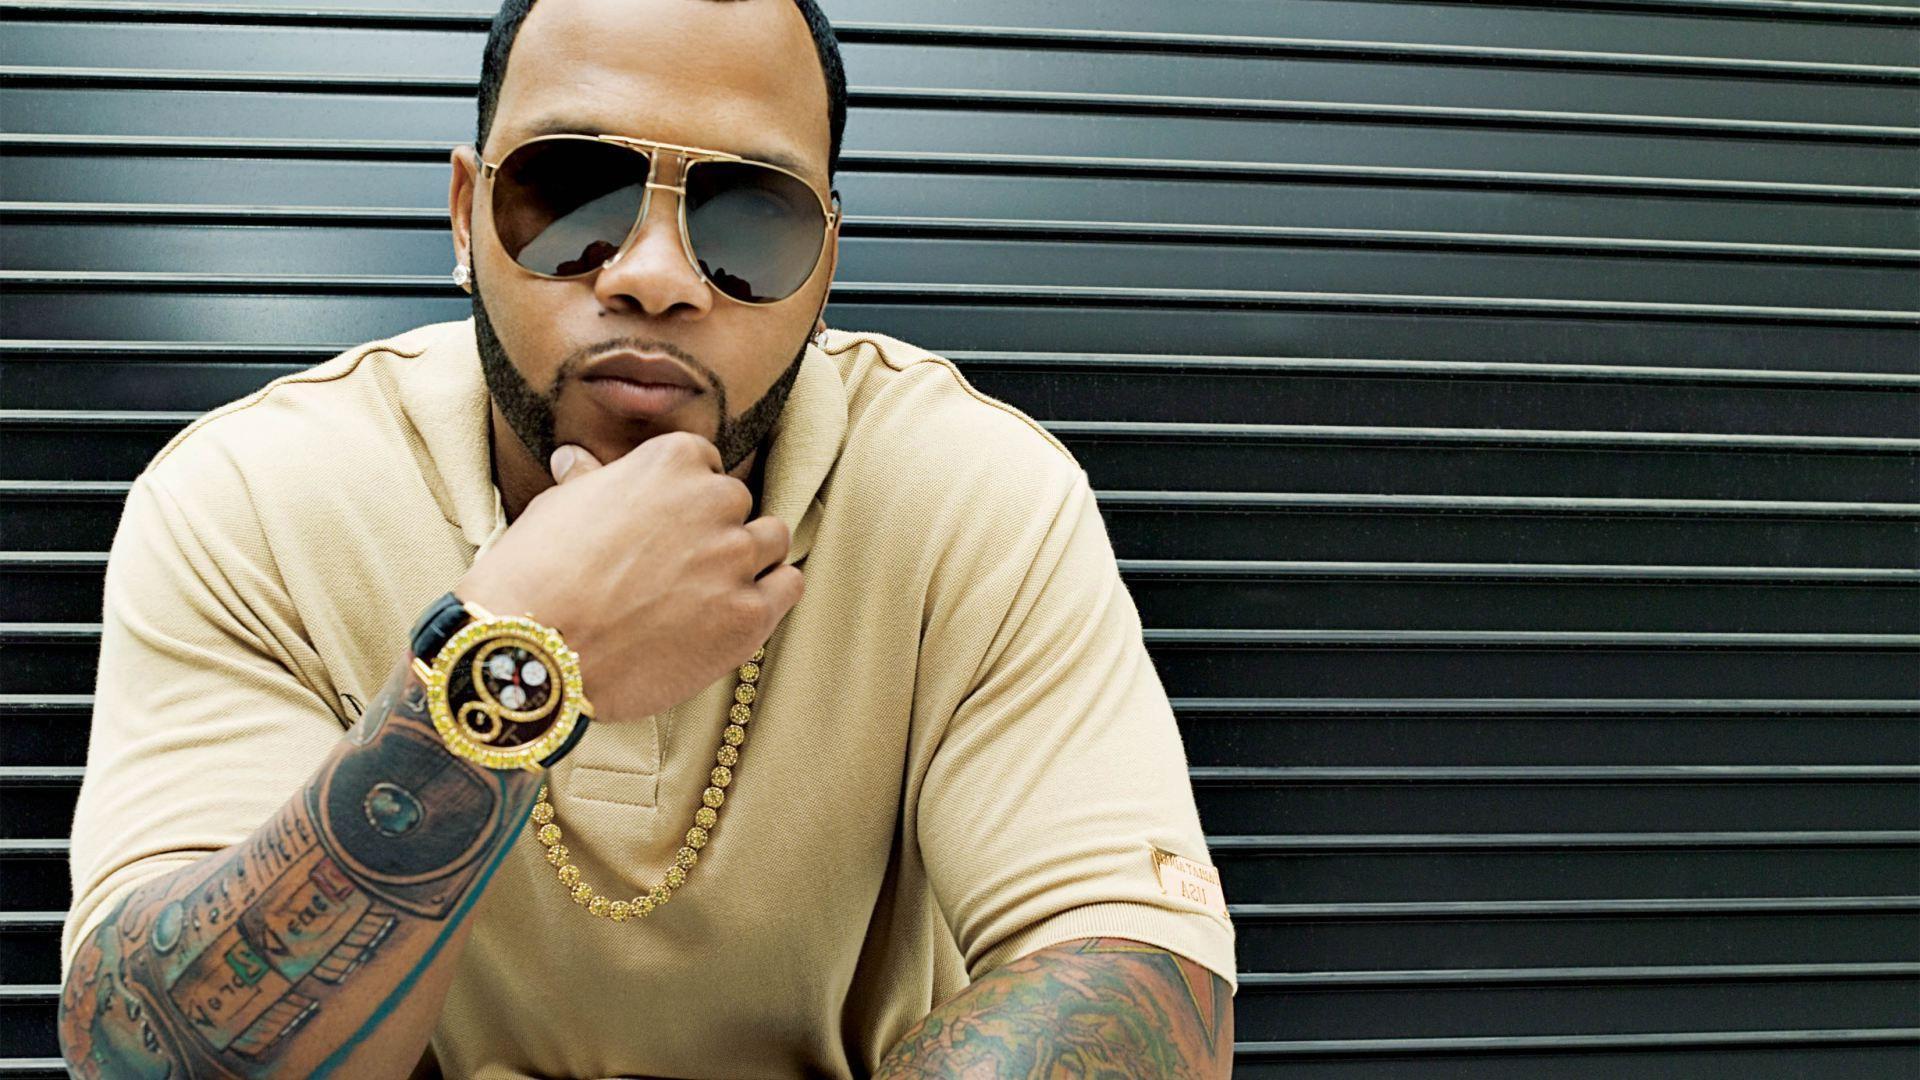 Flo Rida Wallpaper Image Photo Picture Background